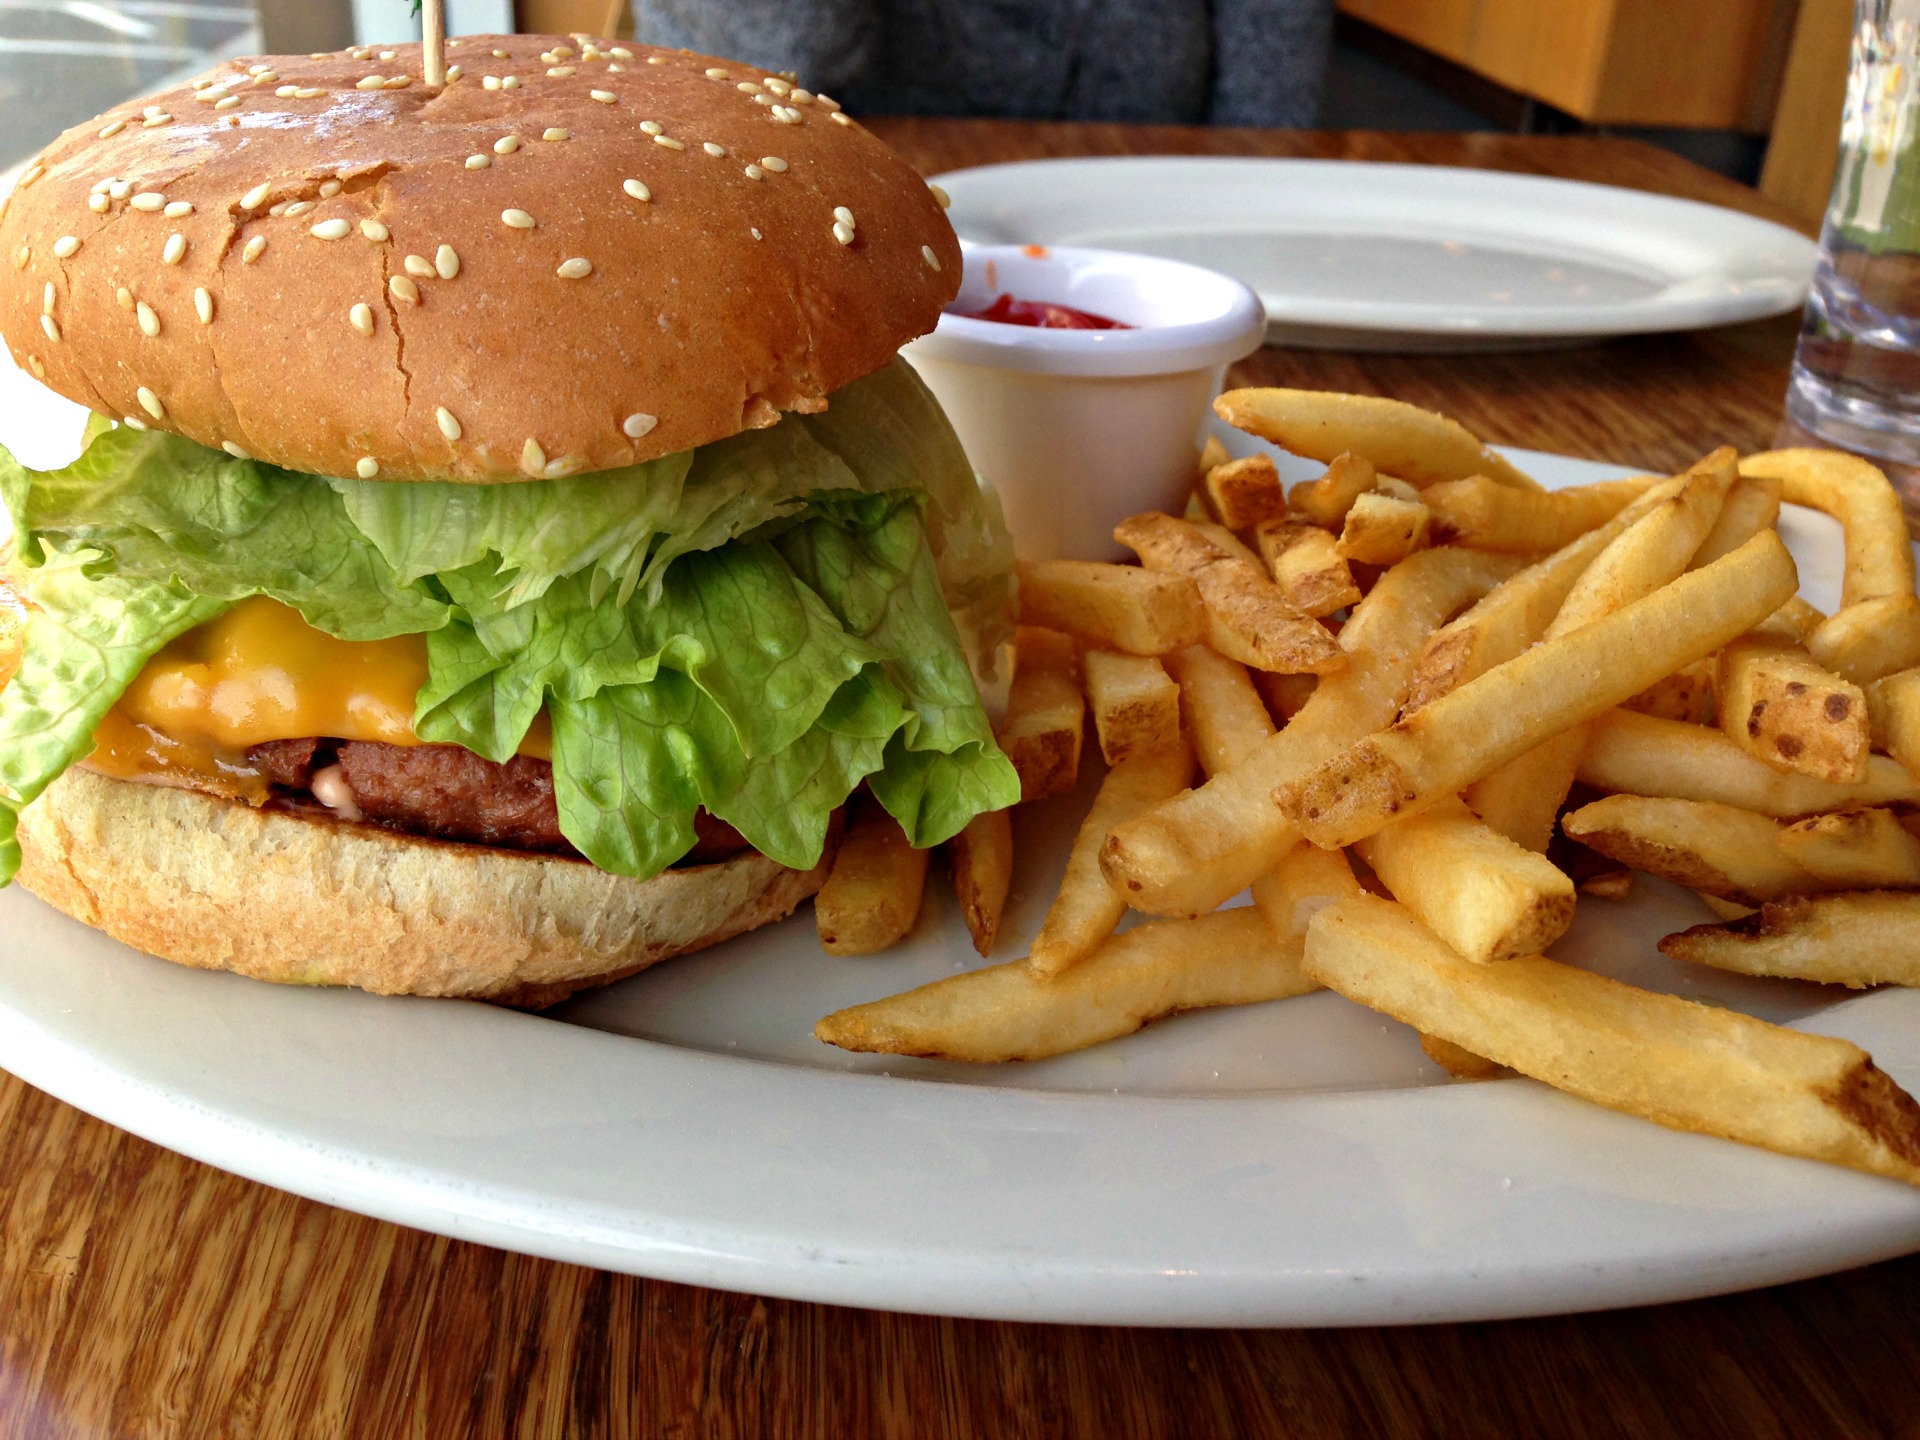 The Beyond Burger at the Veggie Grill.